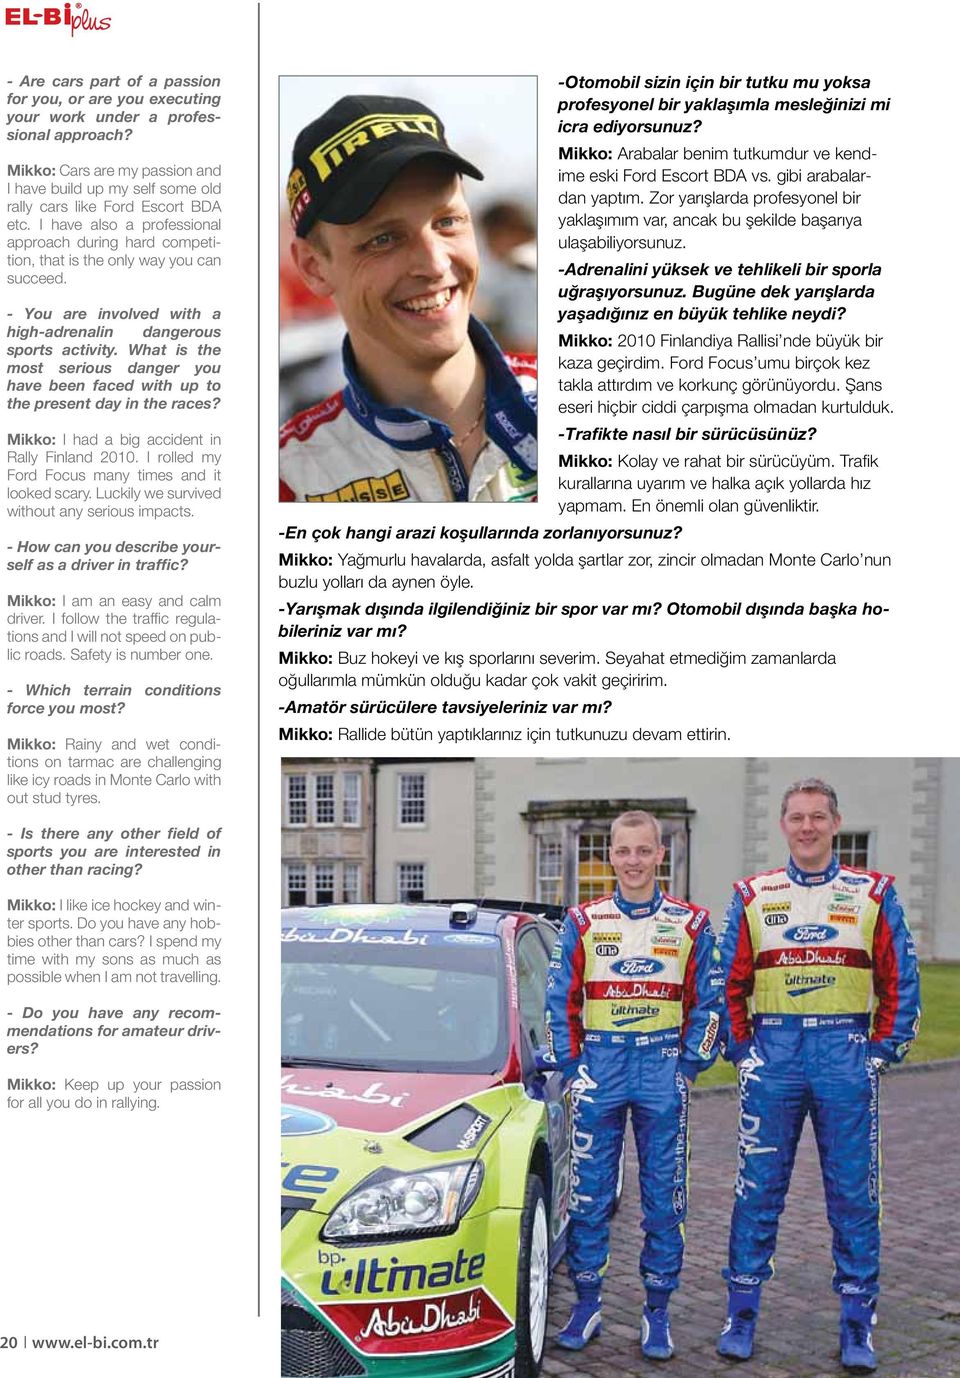 What is the most serious danger you have been faced with up to the present day in the races? Mikko: I had a big accident in Rally Finland 2010. I rolled my Ford Focus many times and it looked scary.